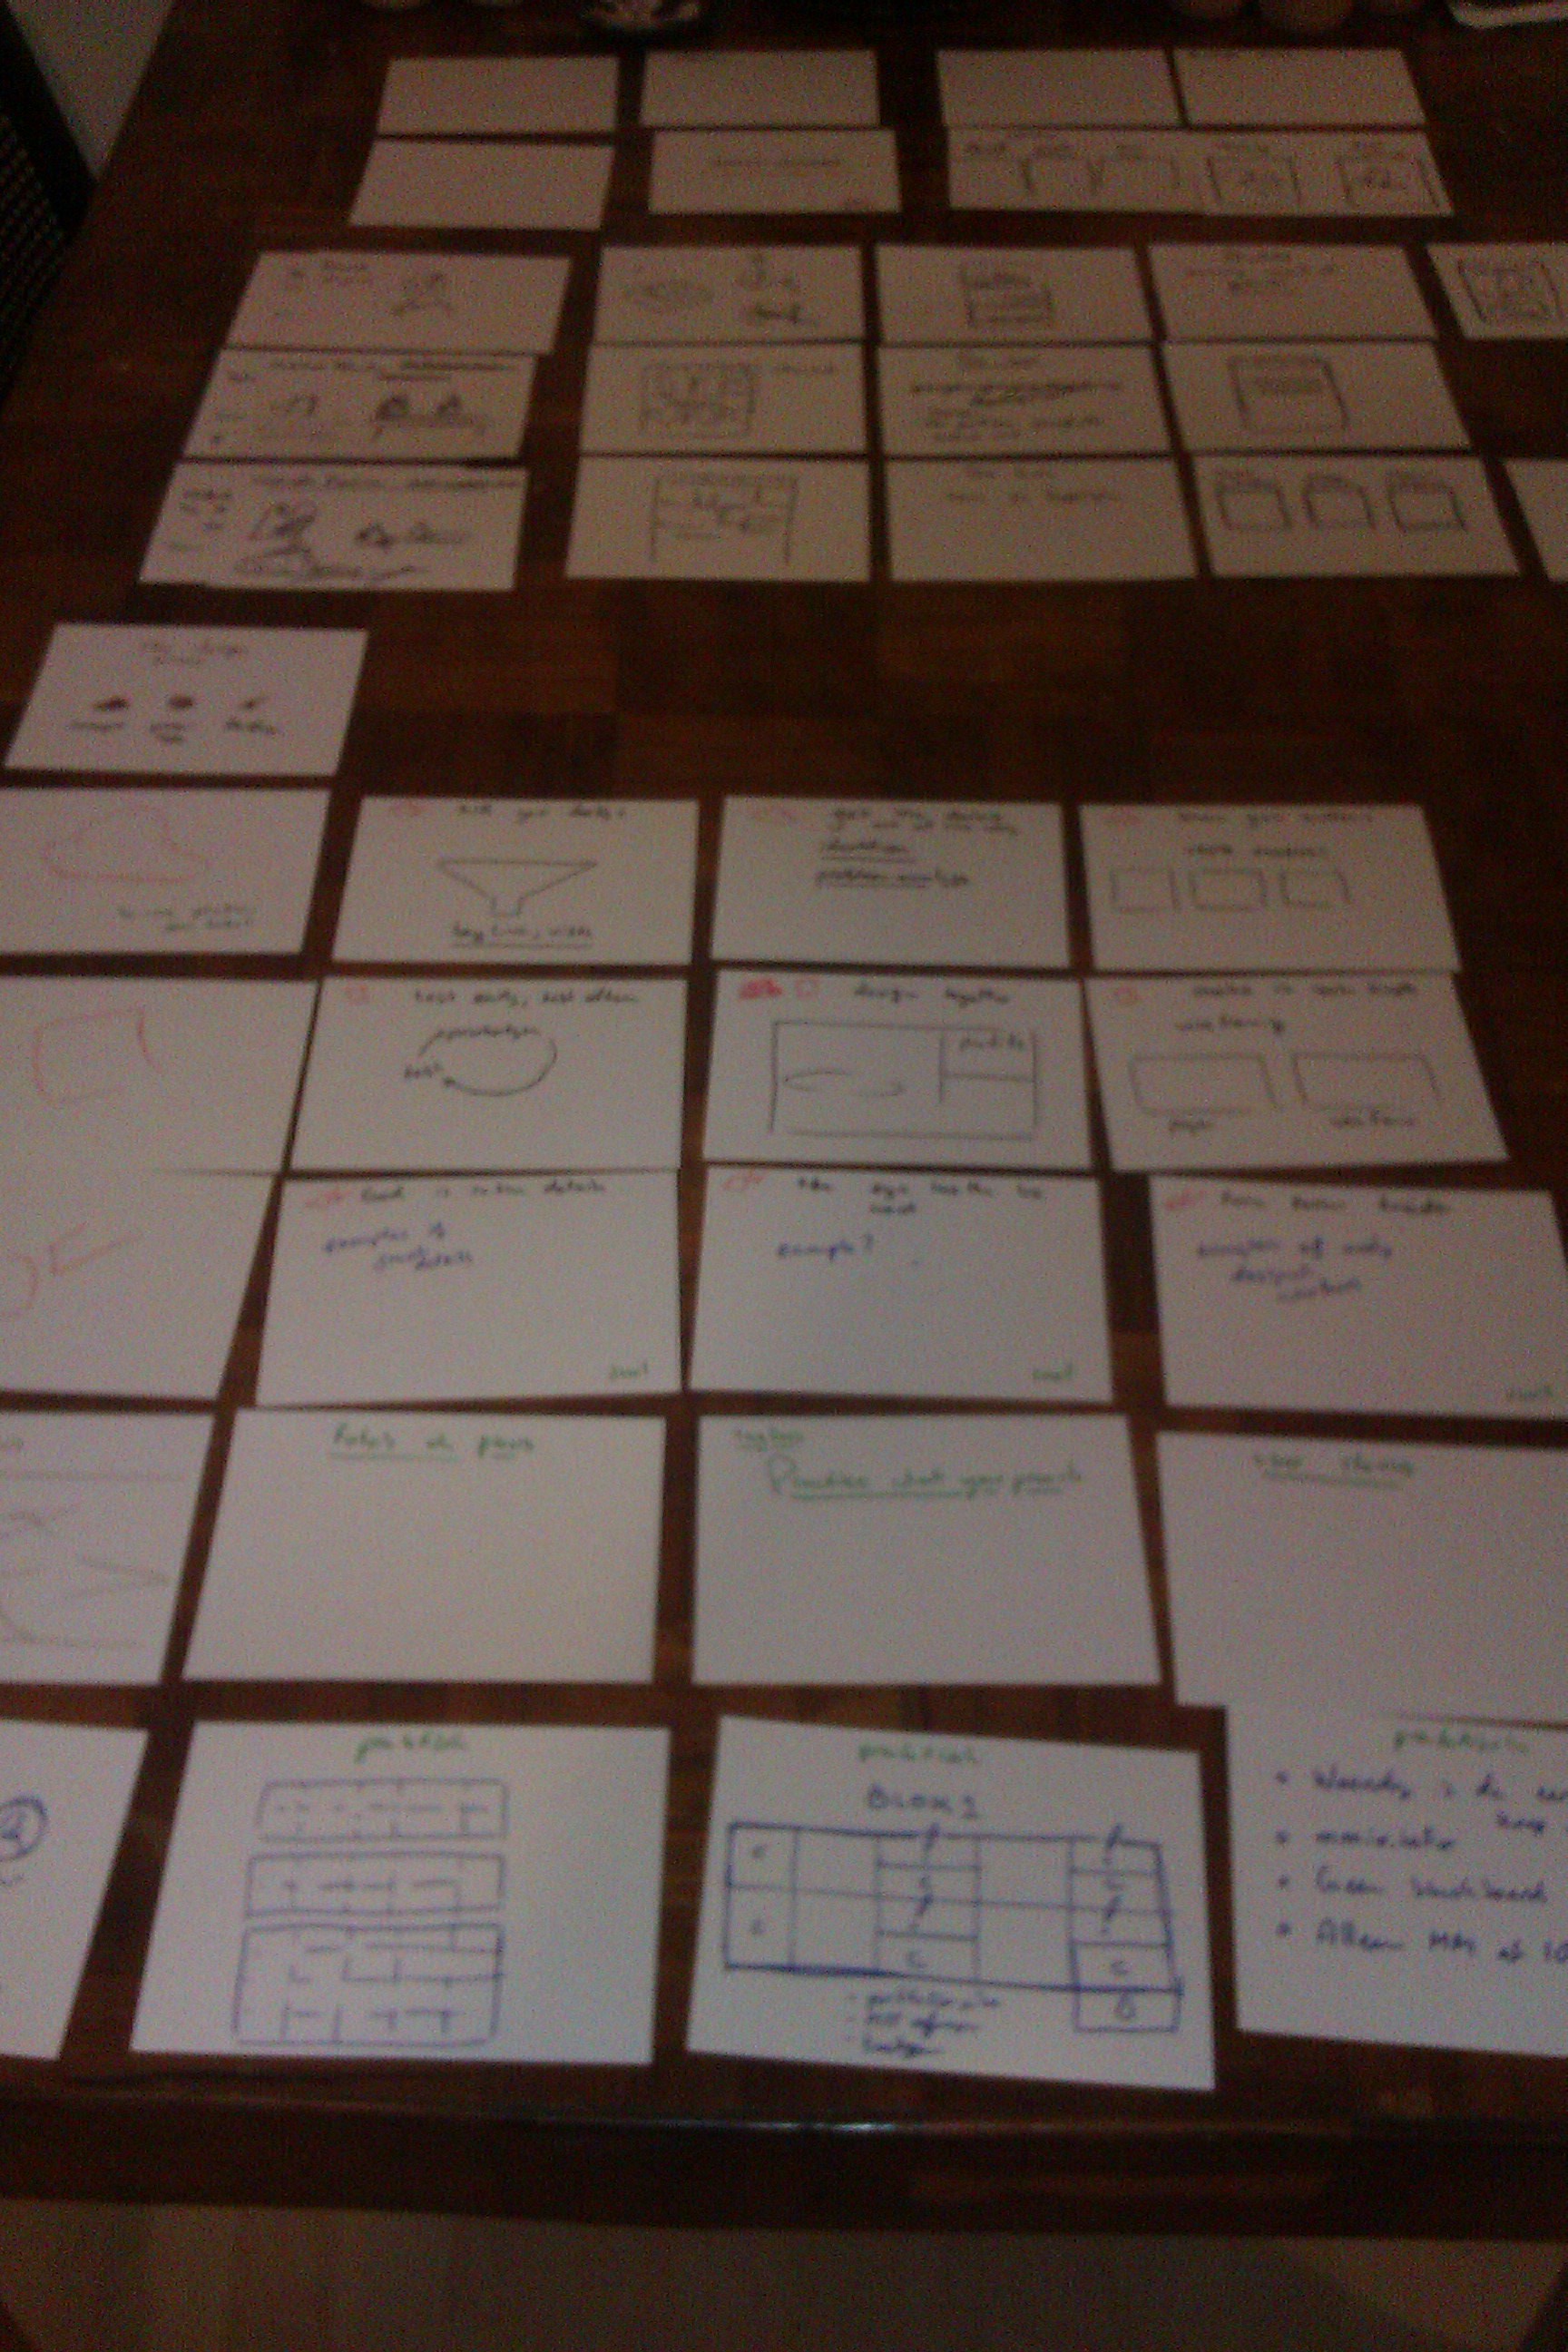 A photograph of a lecture planned out in cardboard cards.